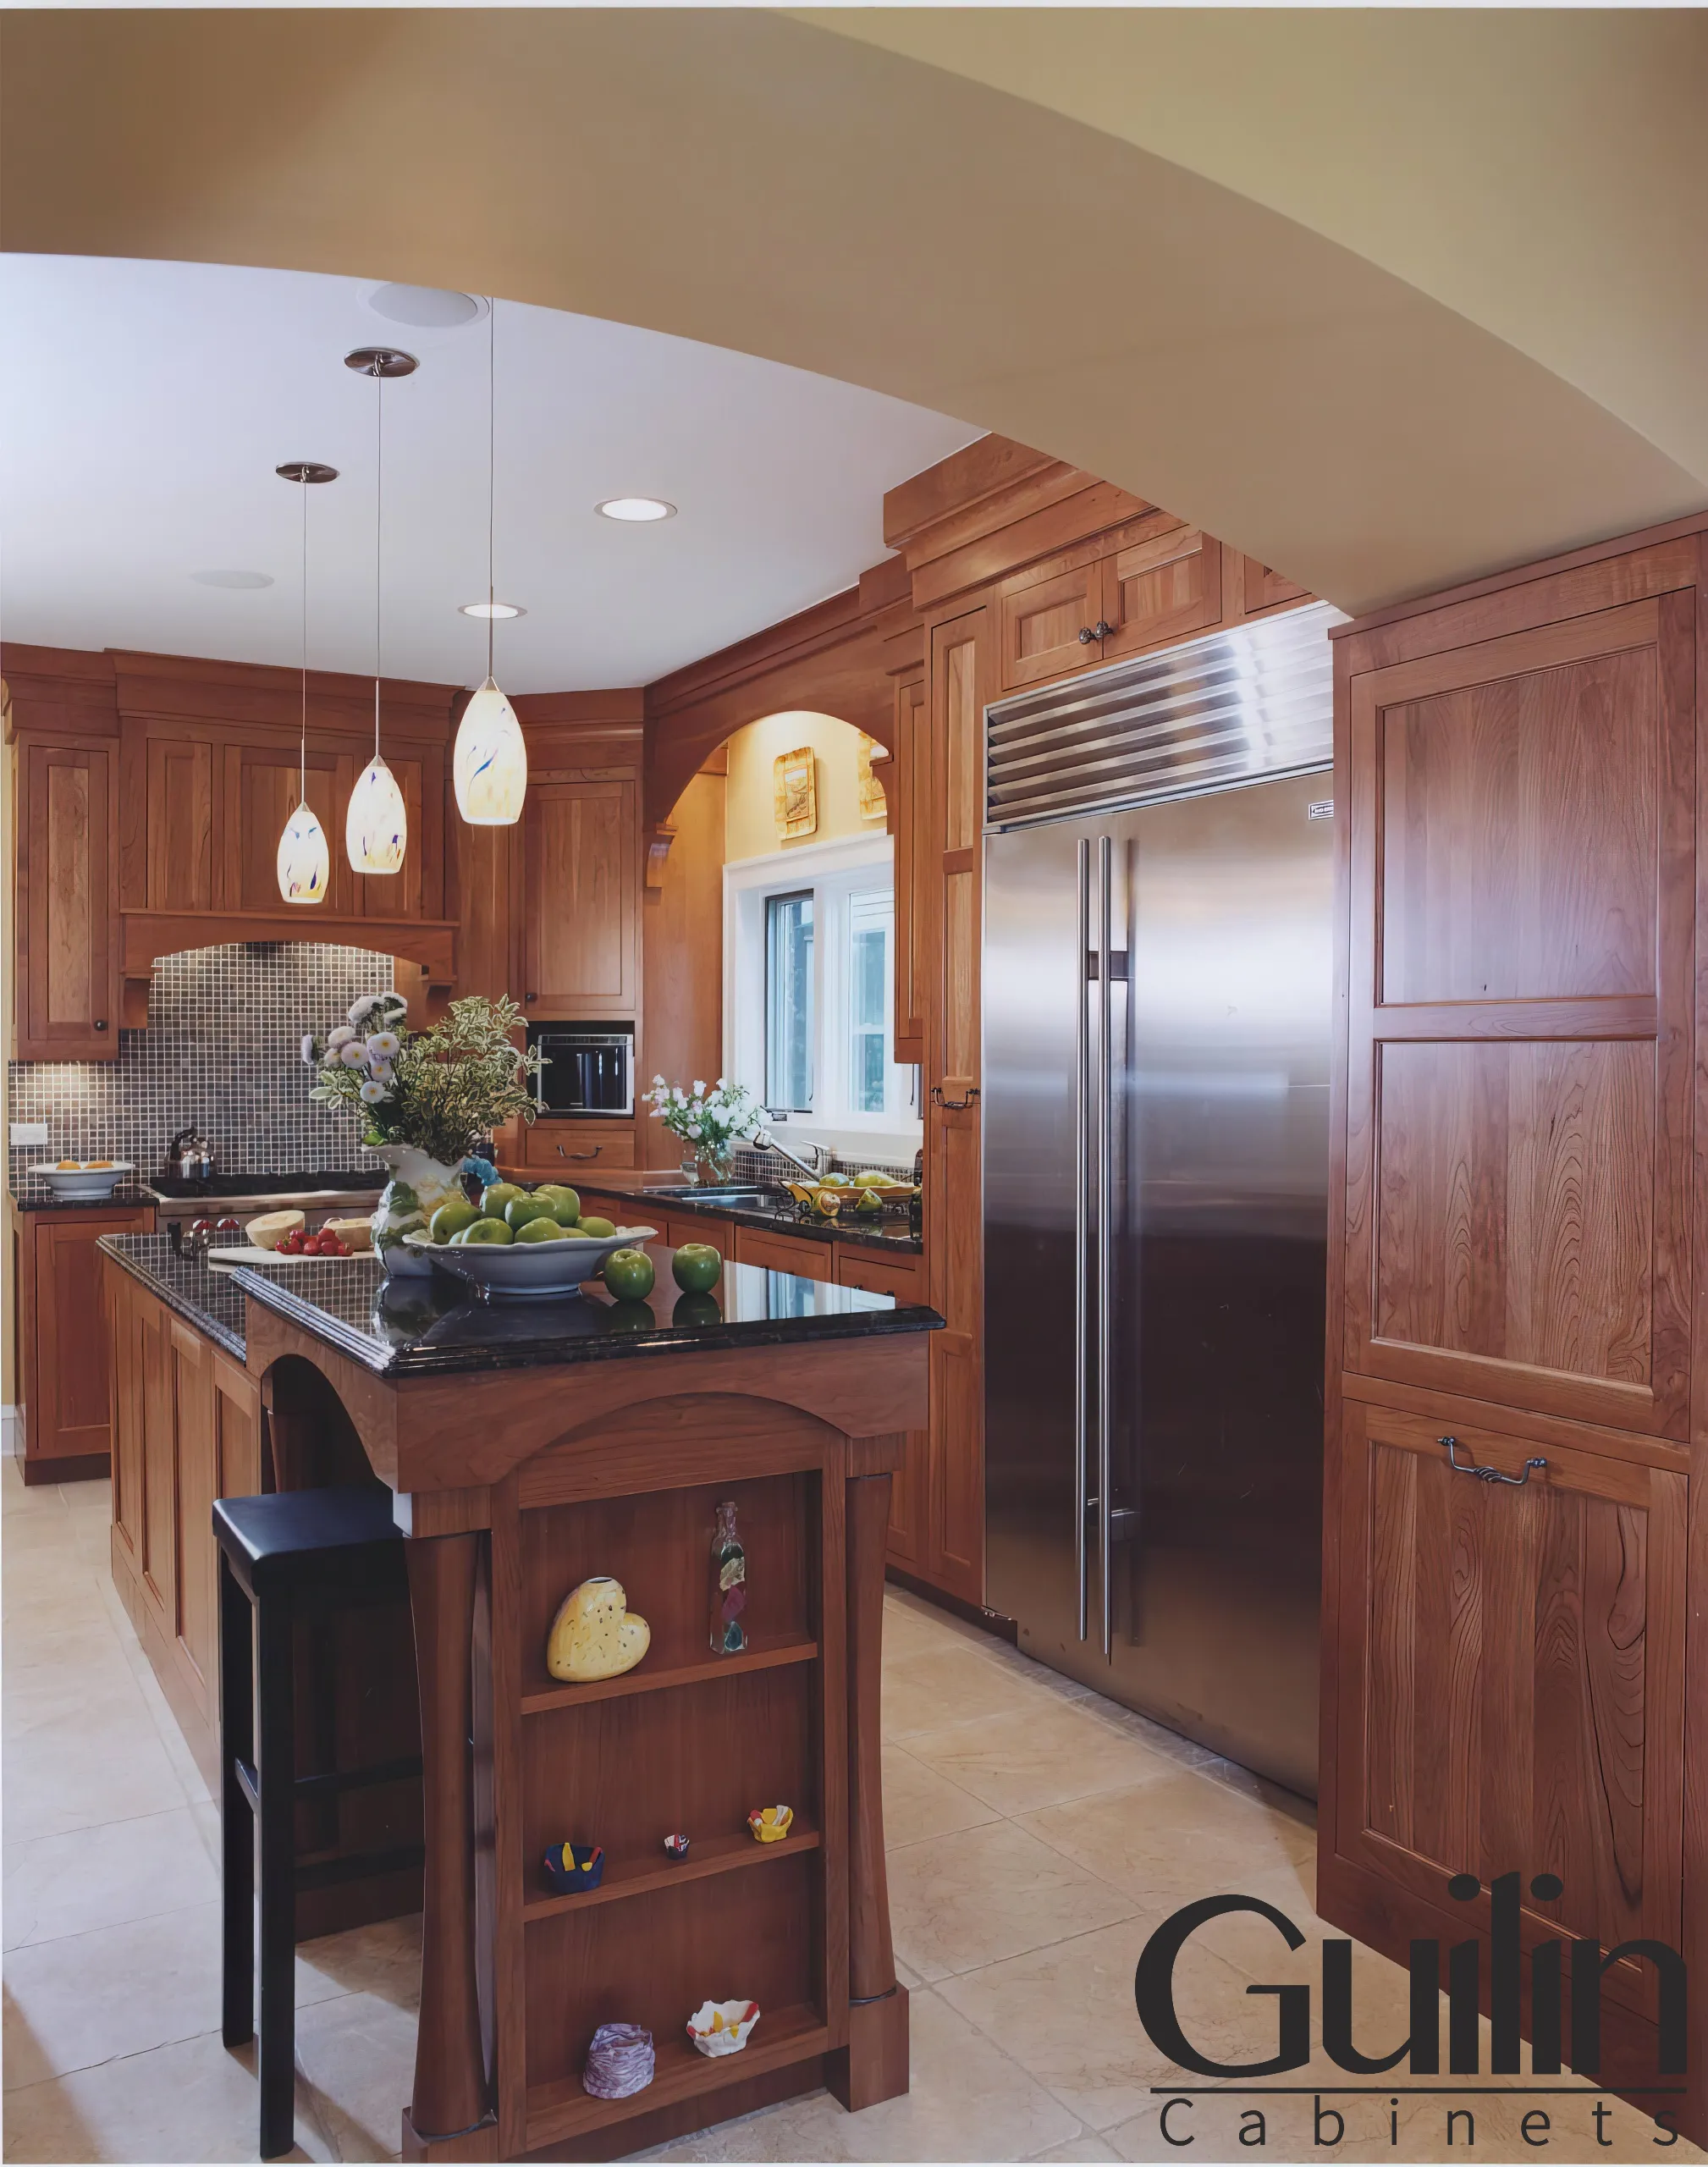 L-shaped kitchen can be difficult to fit large appliances size into the limited space between the two walls.